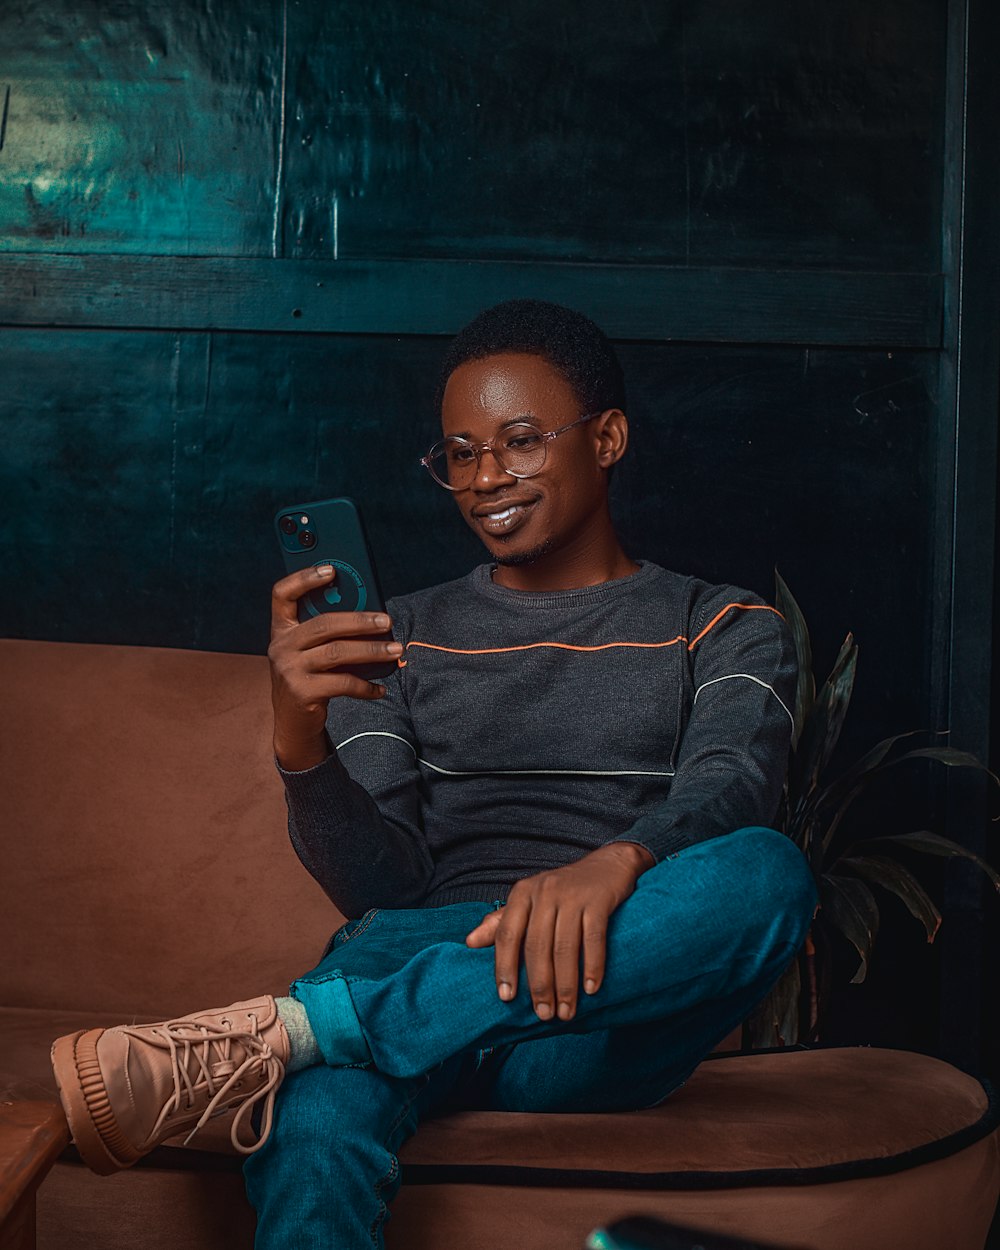 a man sitting on a couch holding a cell phone